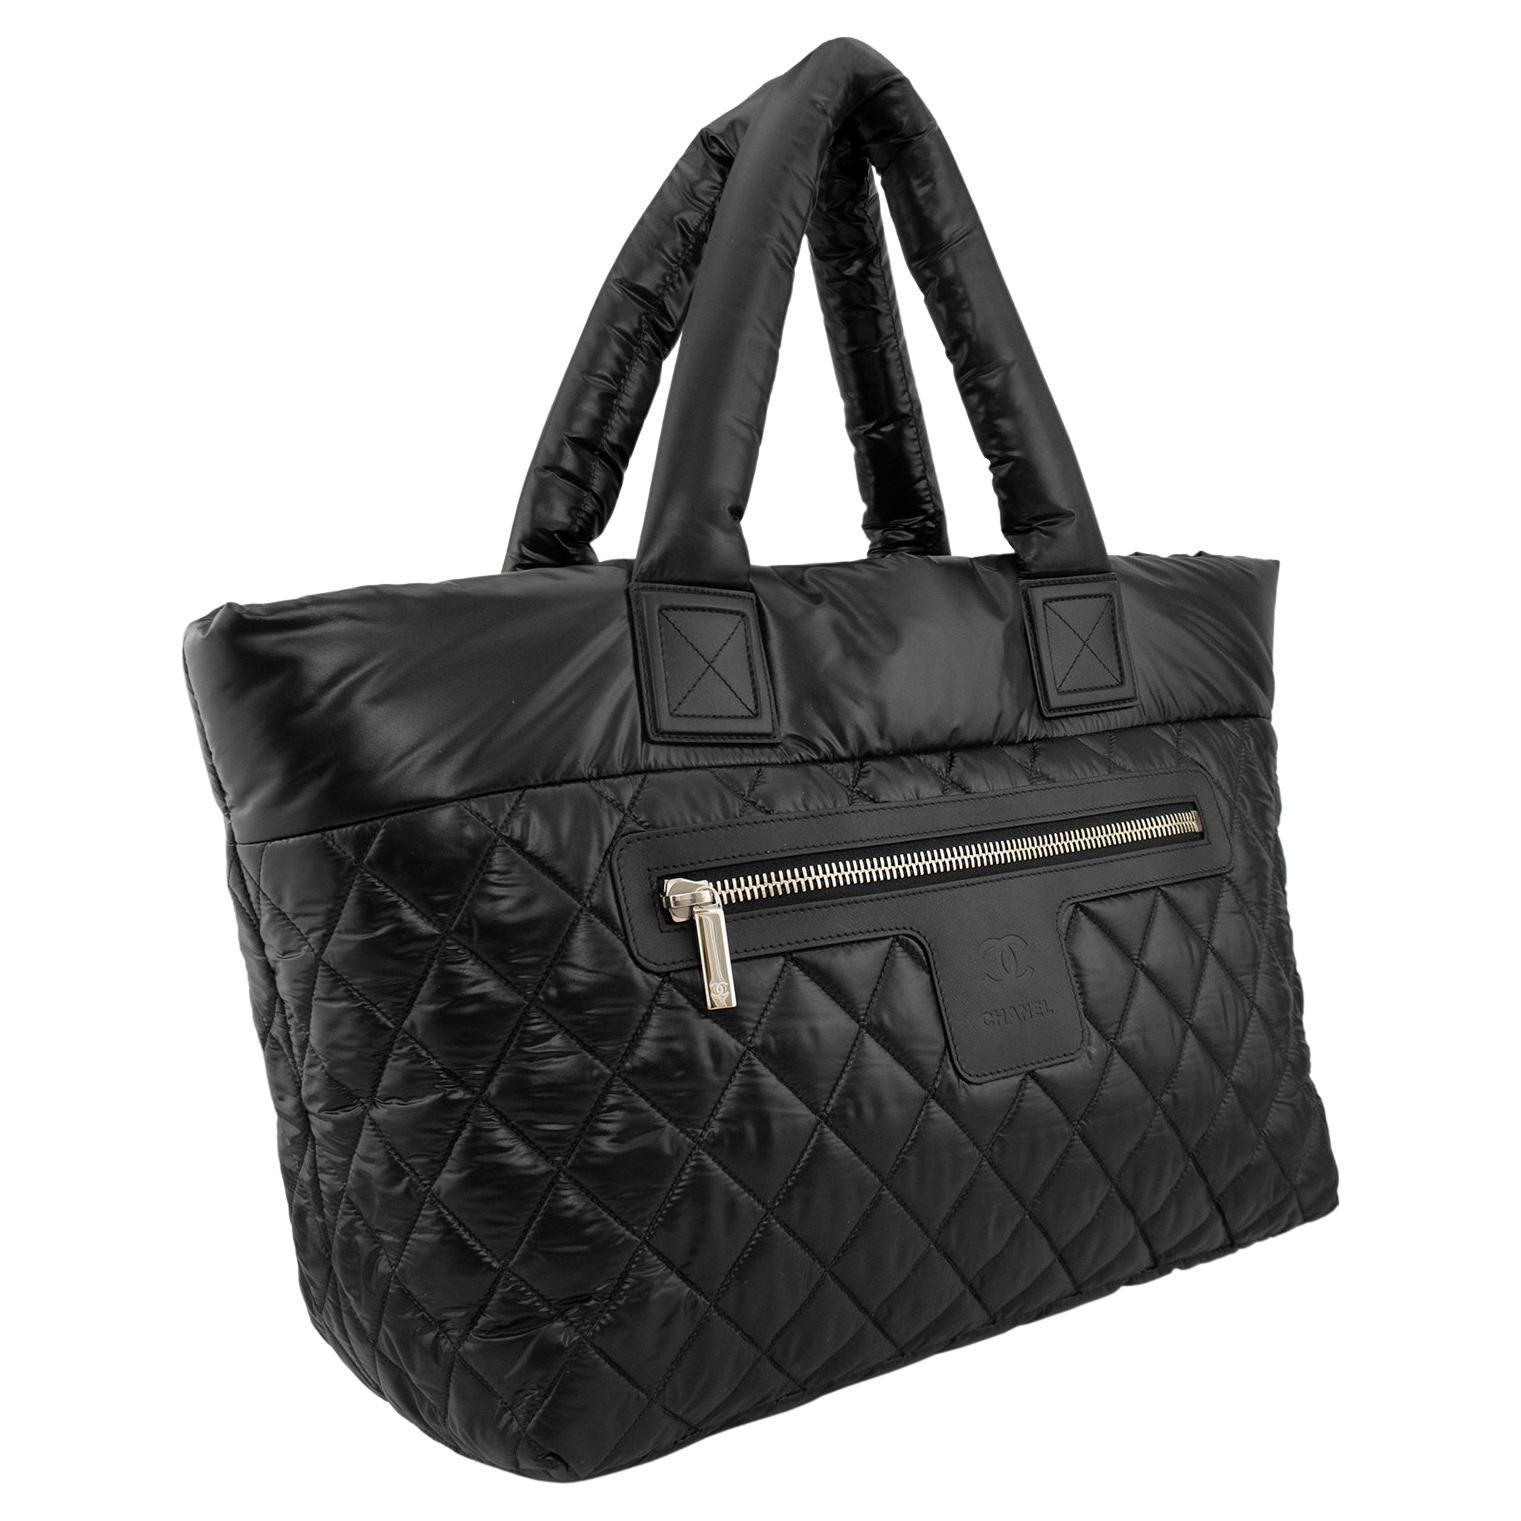 Chanel Coco Cocoon Medium tote quilted in black lined with burgundy nylon. Features padded top handles, exterior zip pocket, and silver-tone hardware. Opens with a zip closure, nylon interior with a zip pocket. In excellent unused condition.